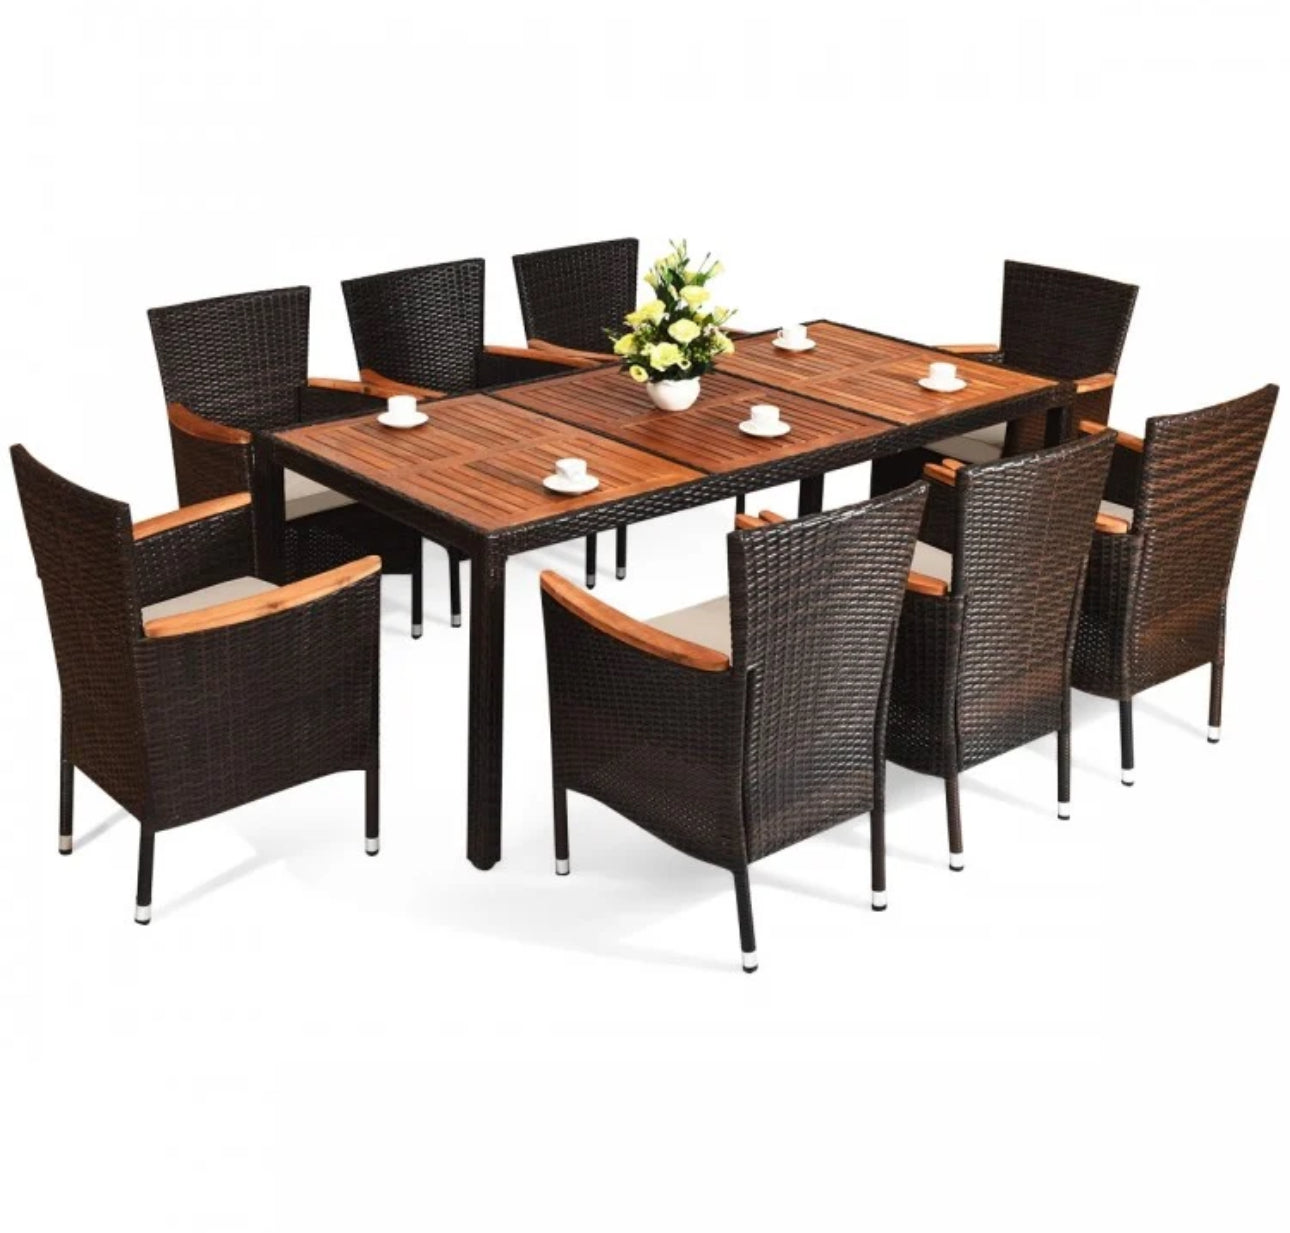 Super Duty Relaxing 9-Piece Outdoor Dining Set With Umbrella Hole | Acacia Wood | Comfy Waterproof Cushions | Rattan | Easy Assembly | Easy Maintenance